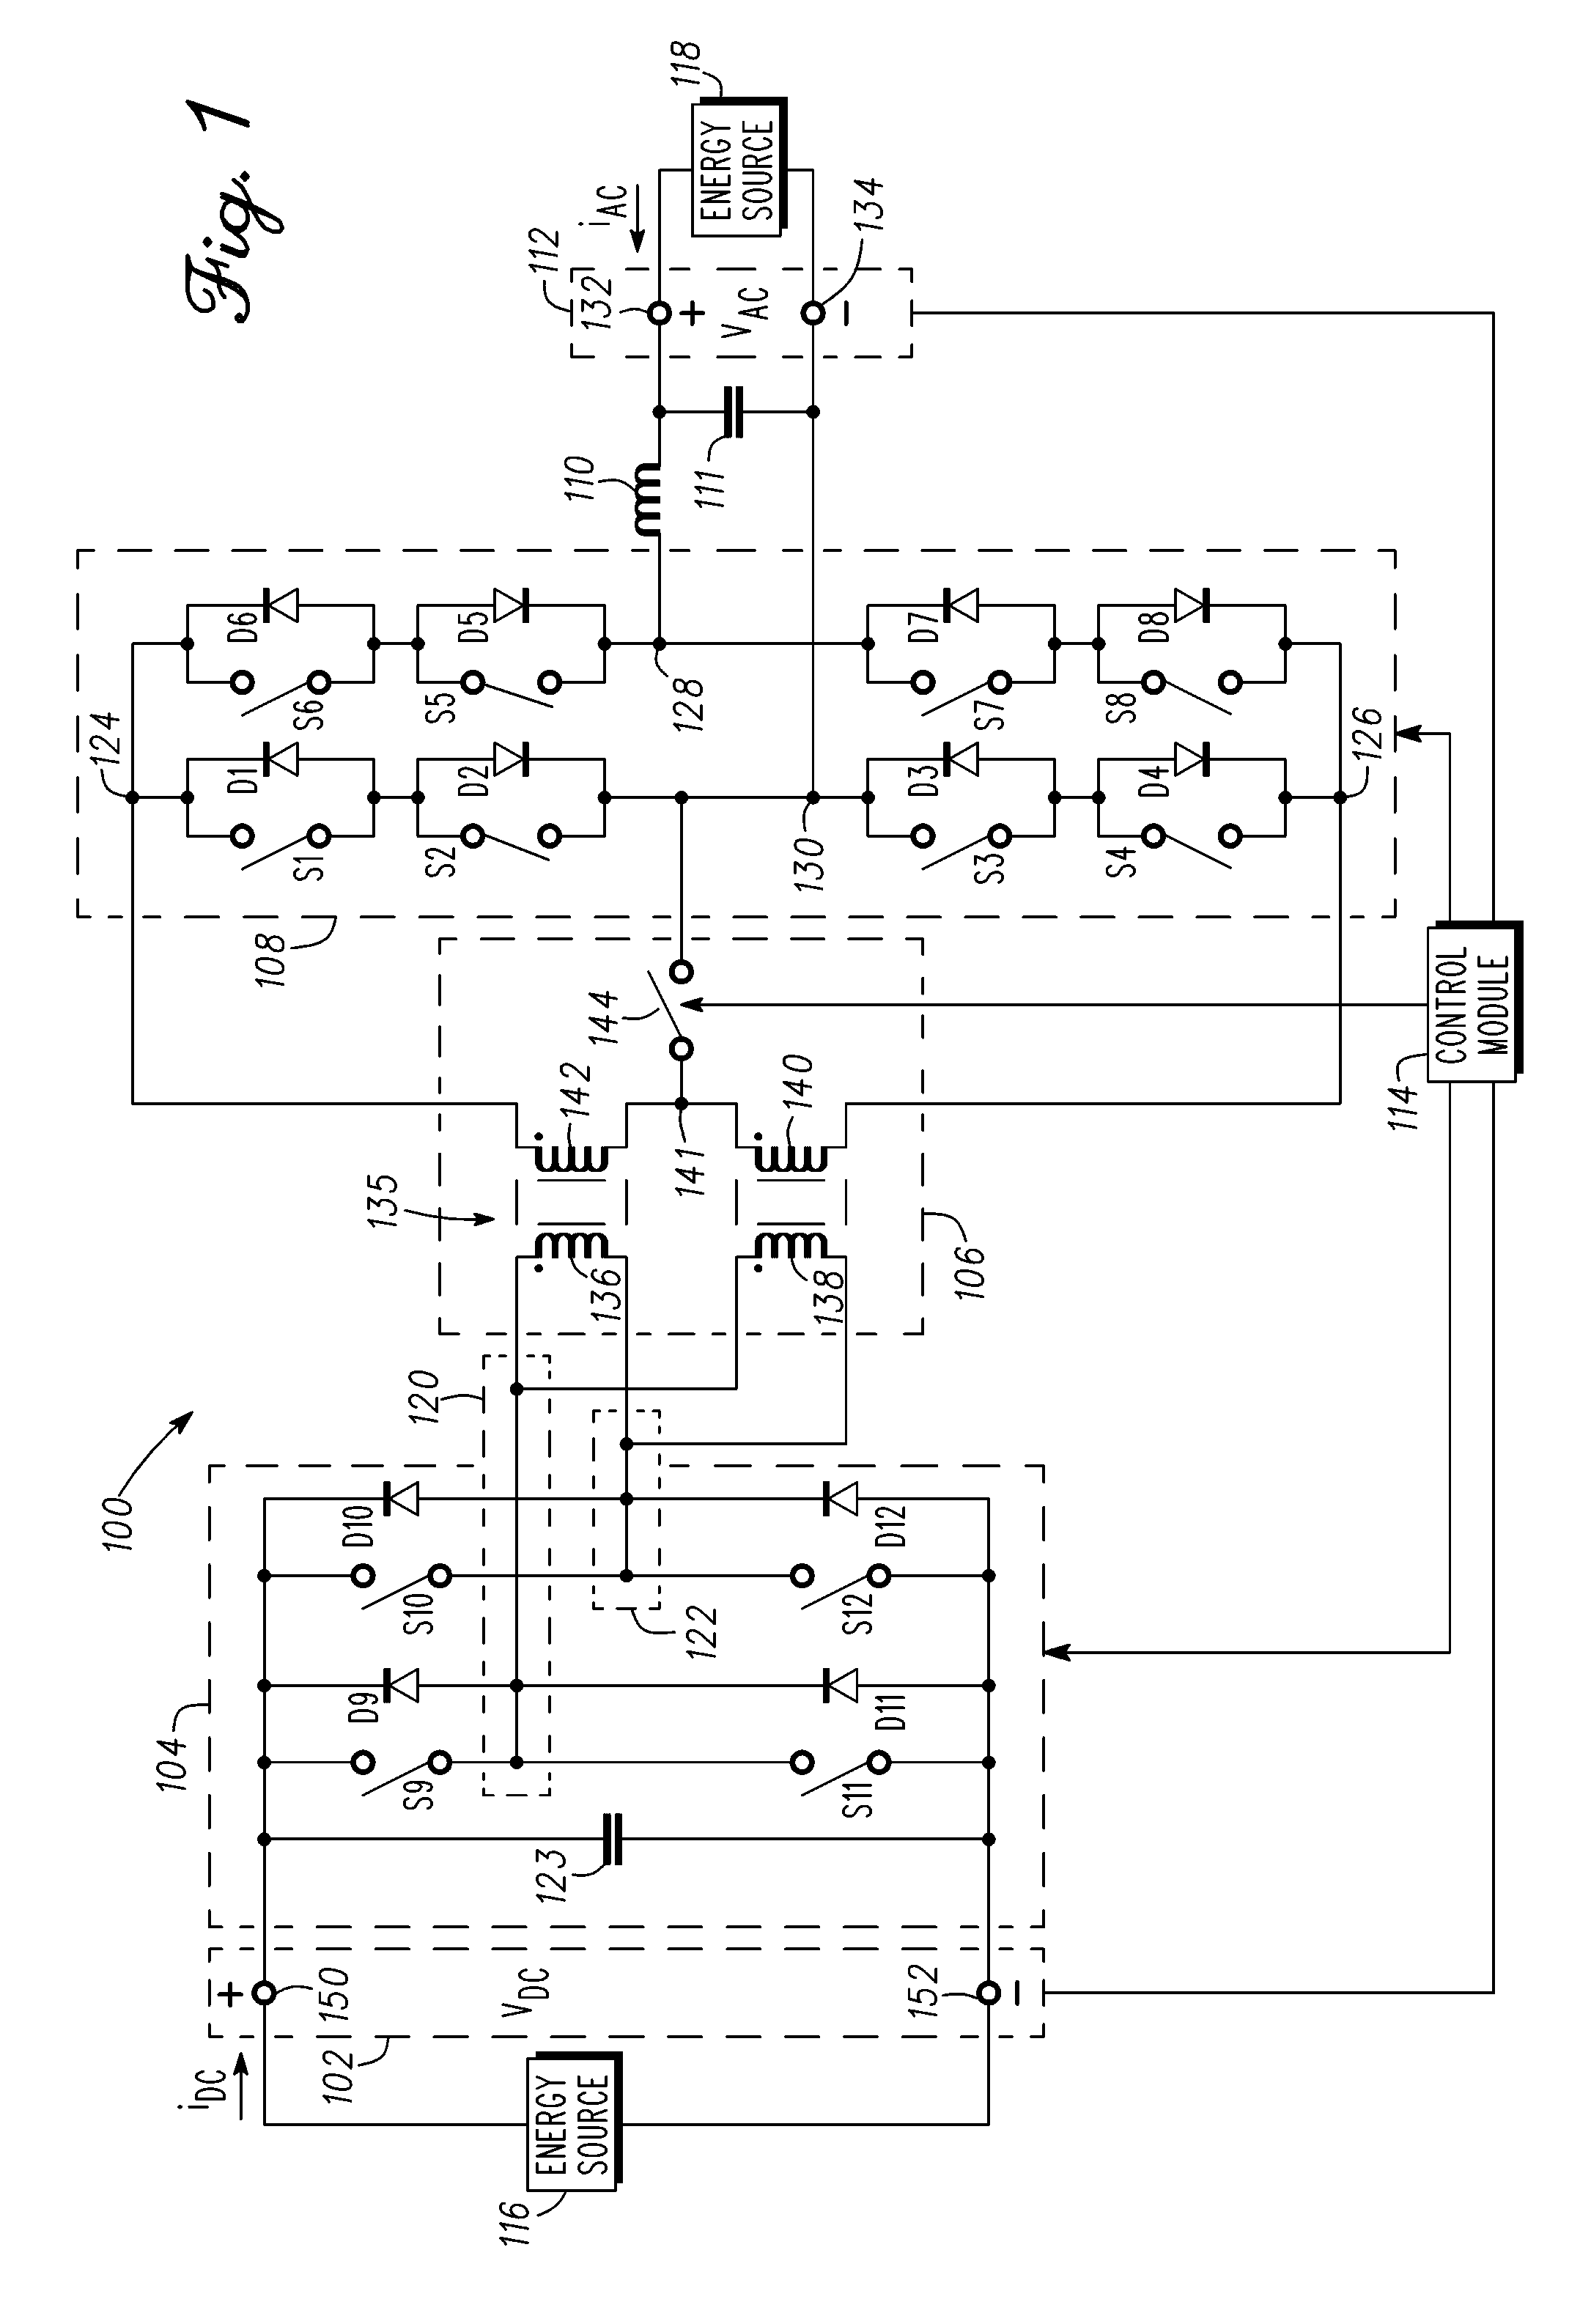 Systems and methods for bi-directional energy delivery with galvanic isolation